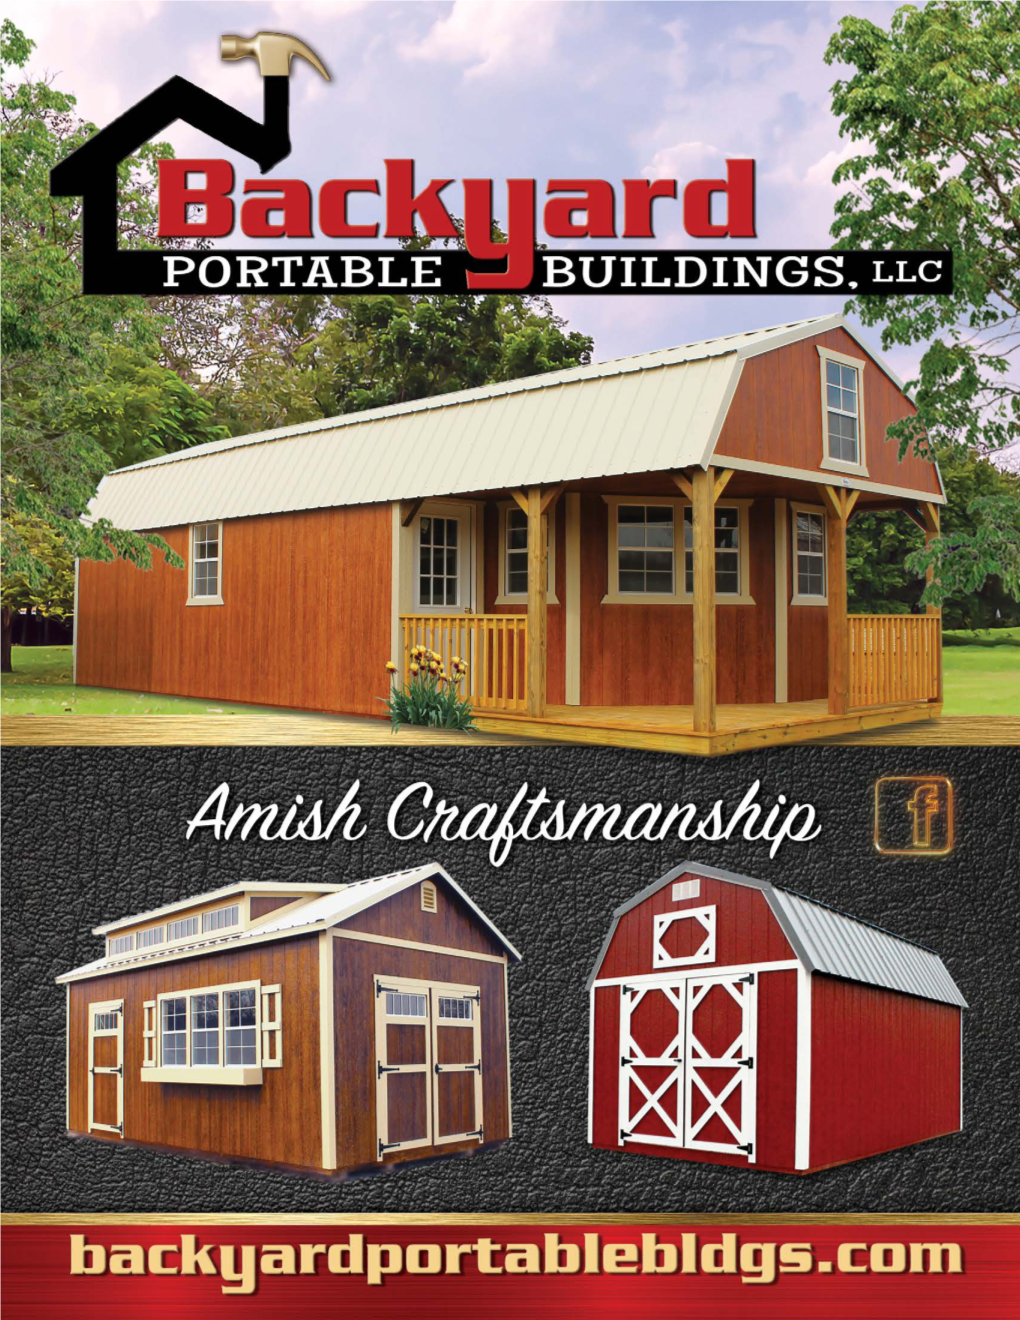 Shingle Or Metal Roof - SAME PRICE!!! Utility UTILITY - Is a Very Basic, Functional, Storage Shed That Has a Standard Pitch A-Frame Roof with No Lofts